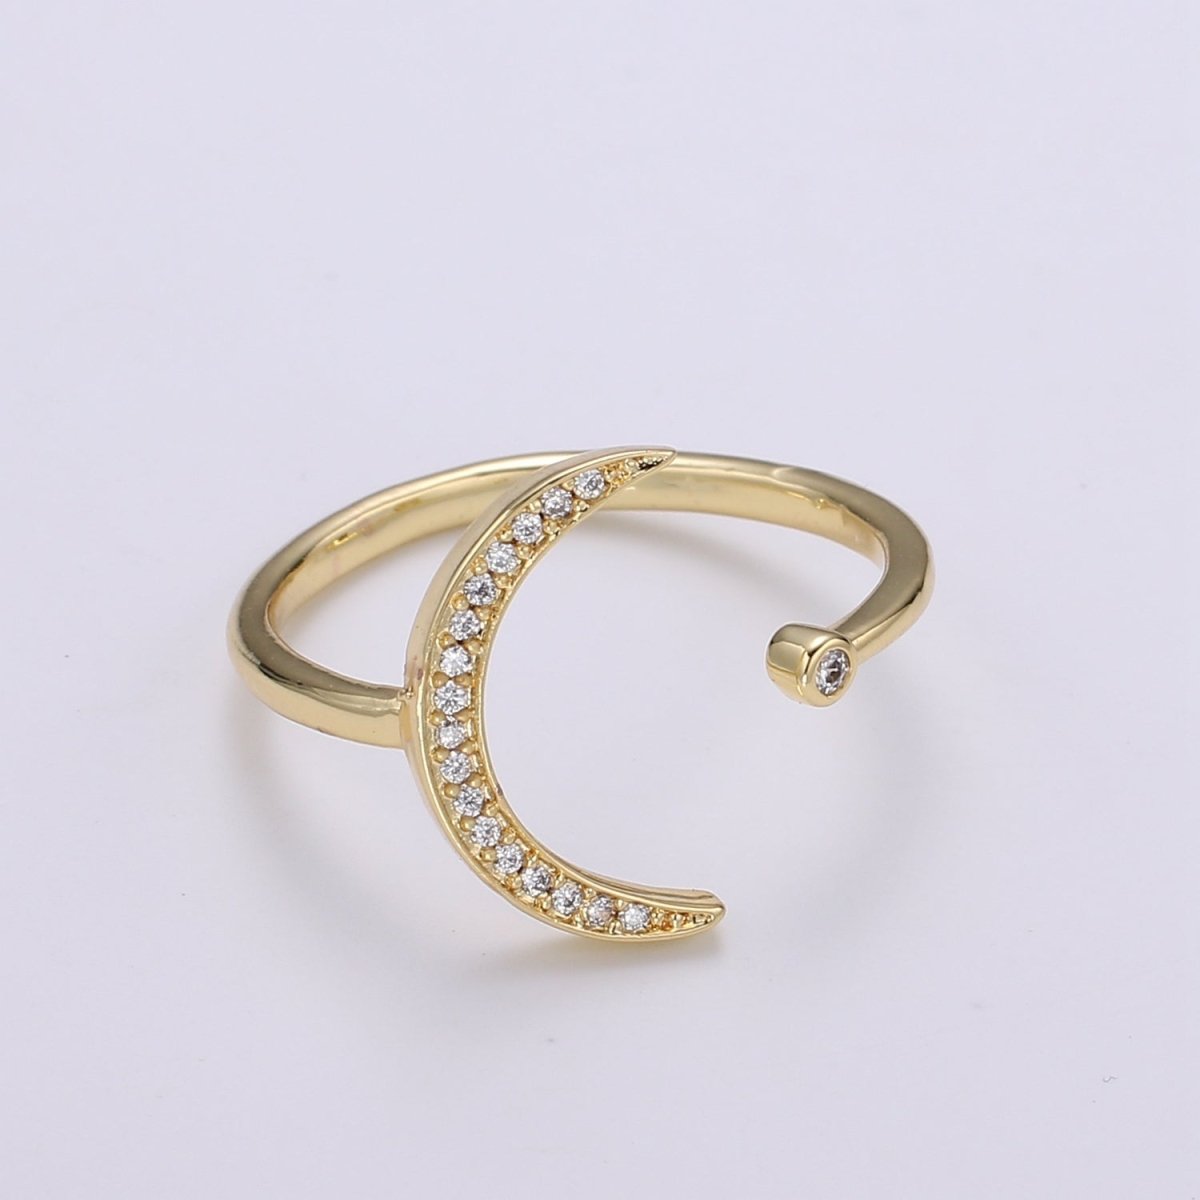 1pc Cresent Moon Star CZ Gold Ring, Moon Cubic Pave Adjustable Gold Curb Ring, Simple Ring, Clear Cubic Zirconia R315 - DLUXCA